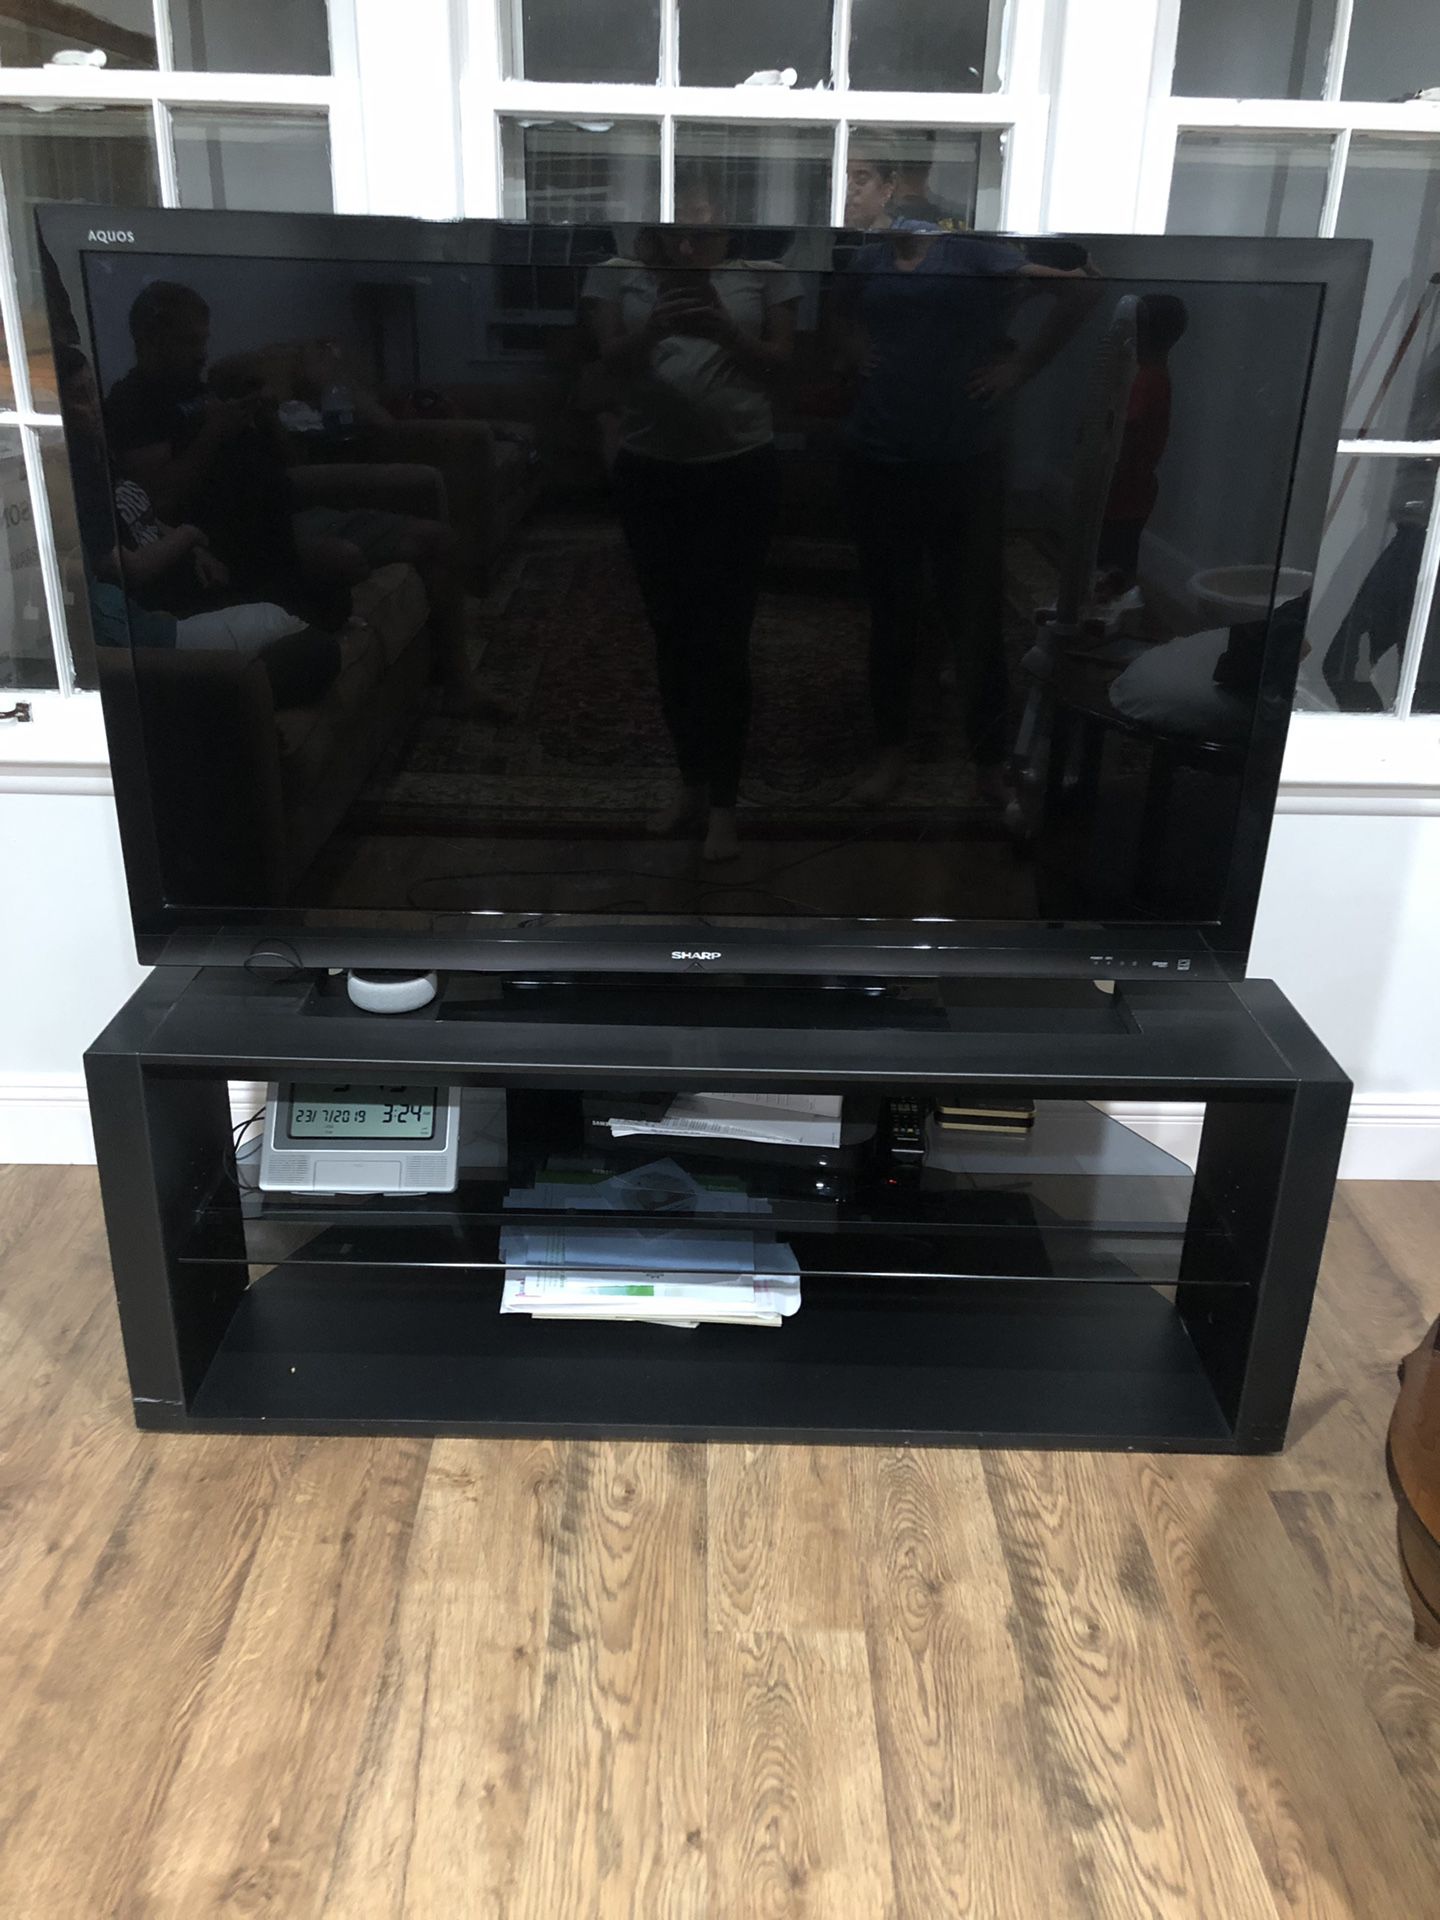 Shark (aquos) tv and tv console